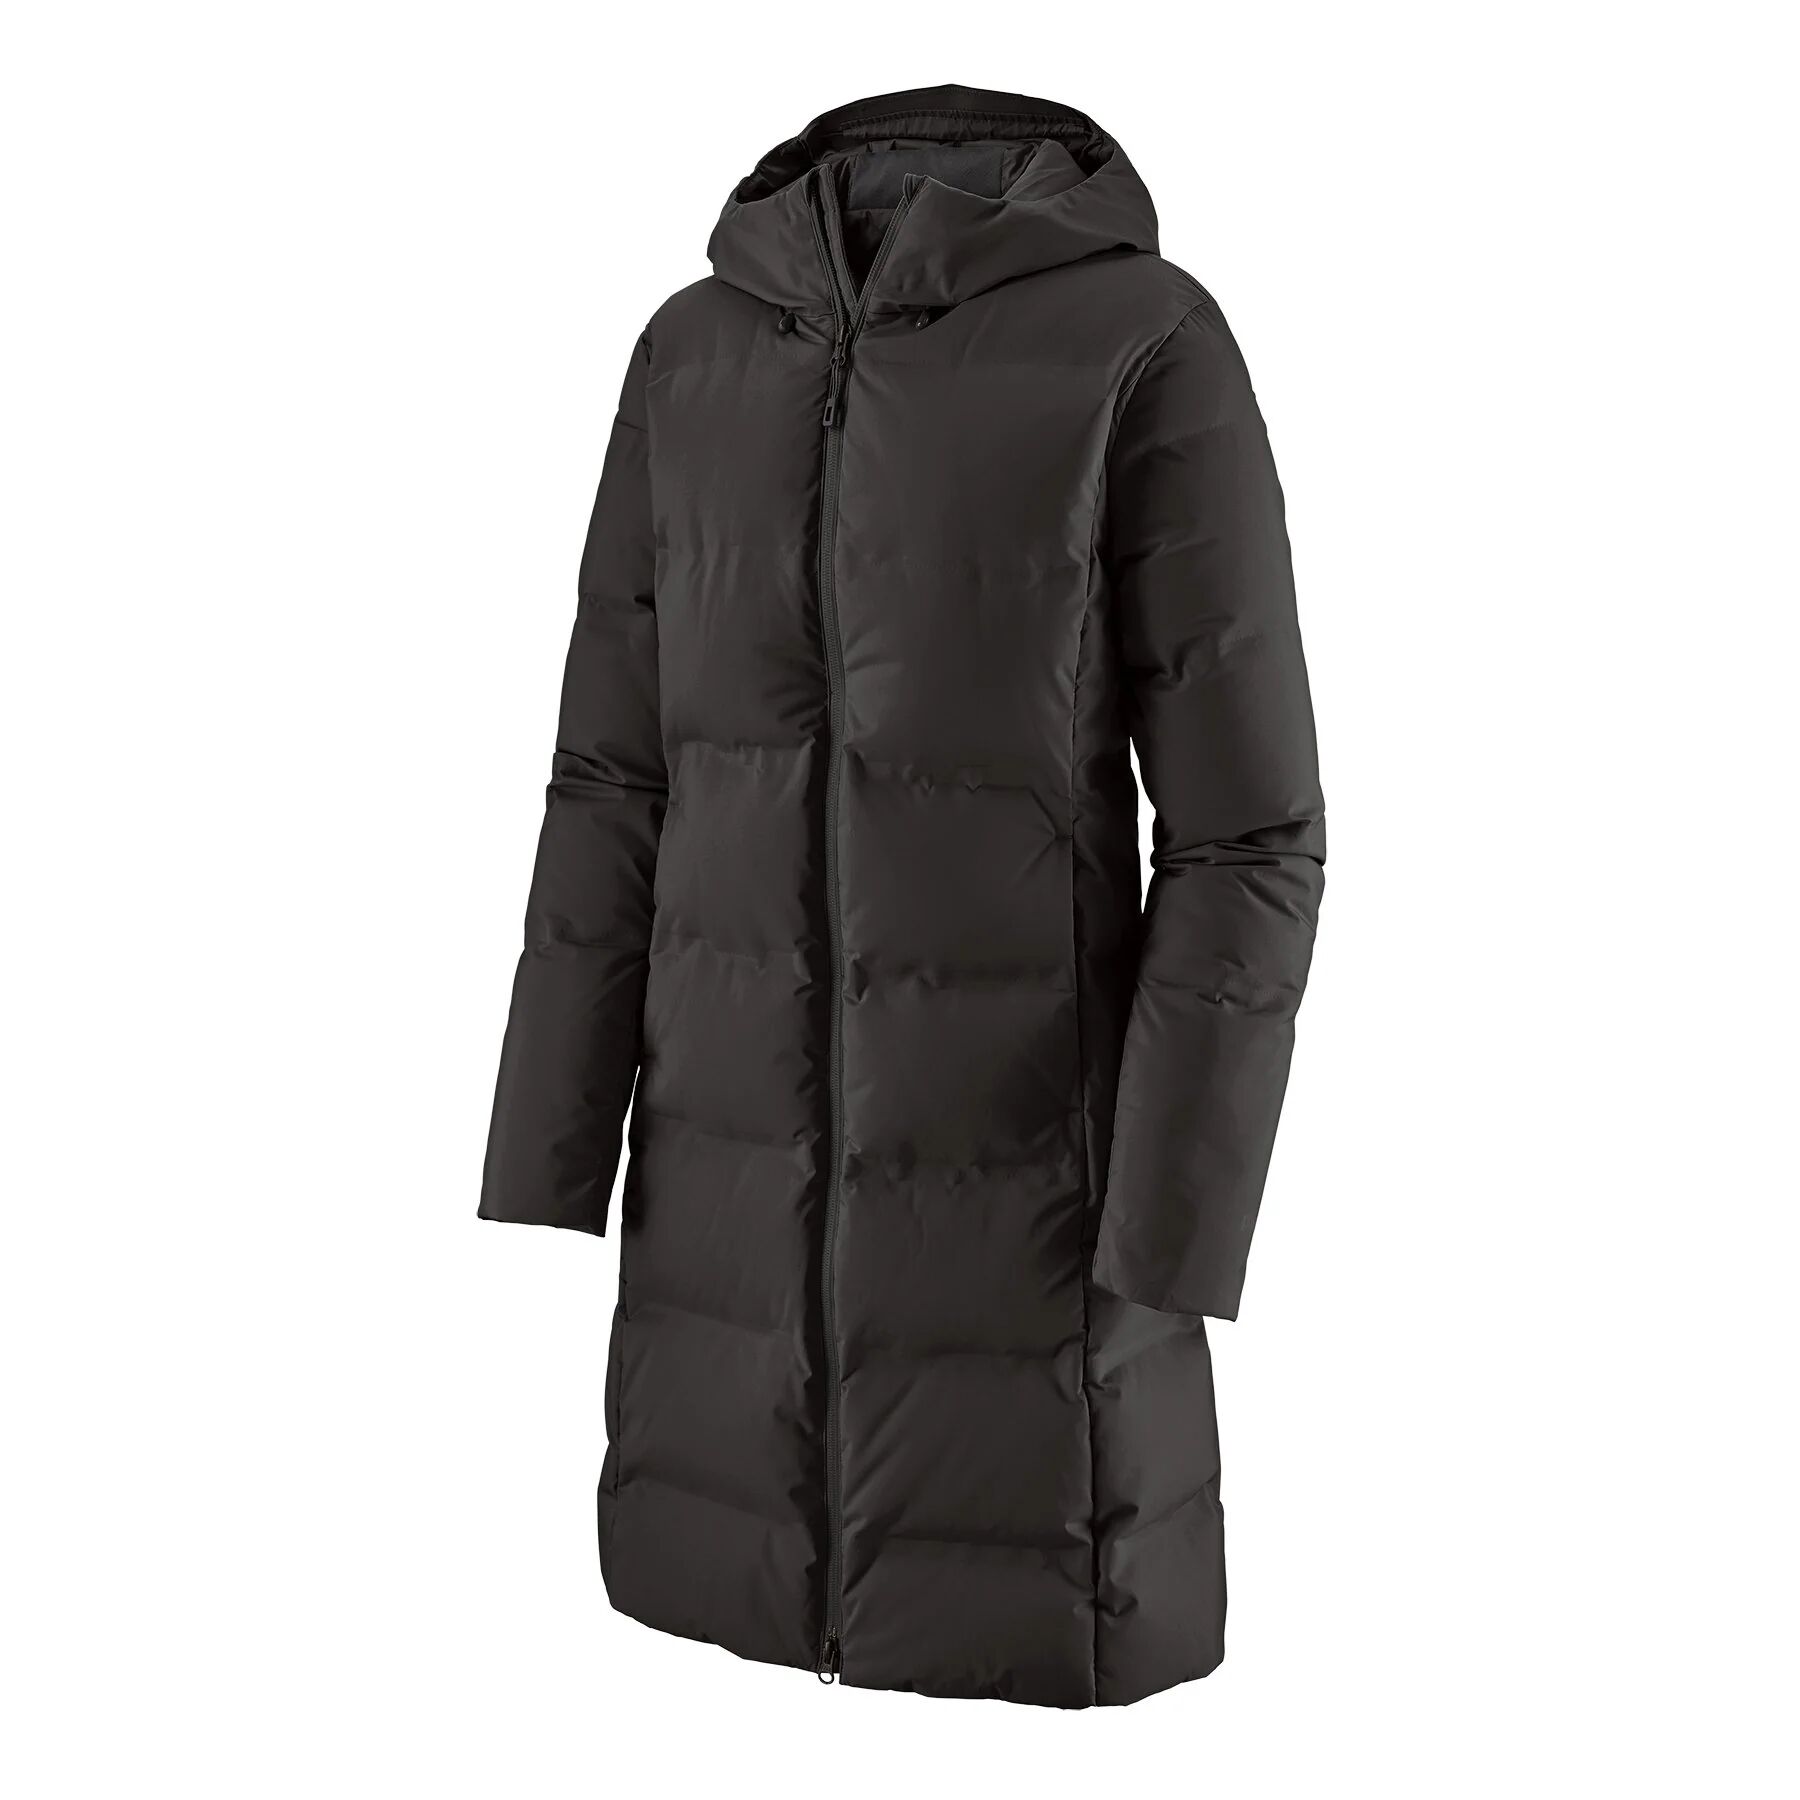 Patagonia W's Jackson Glacier Parka - Recycled Down / Recycled Polyester, Black / M